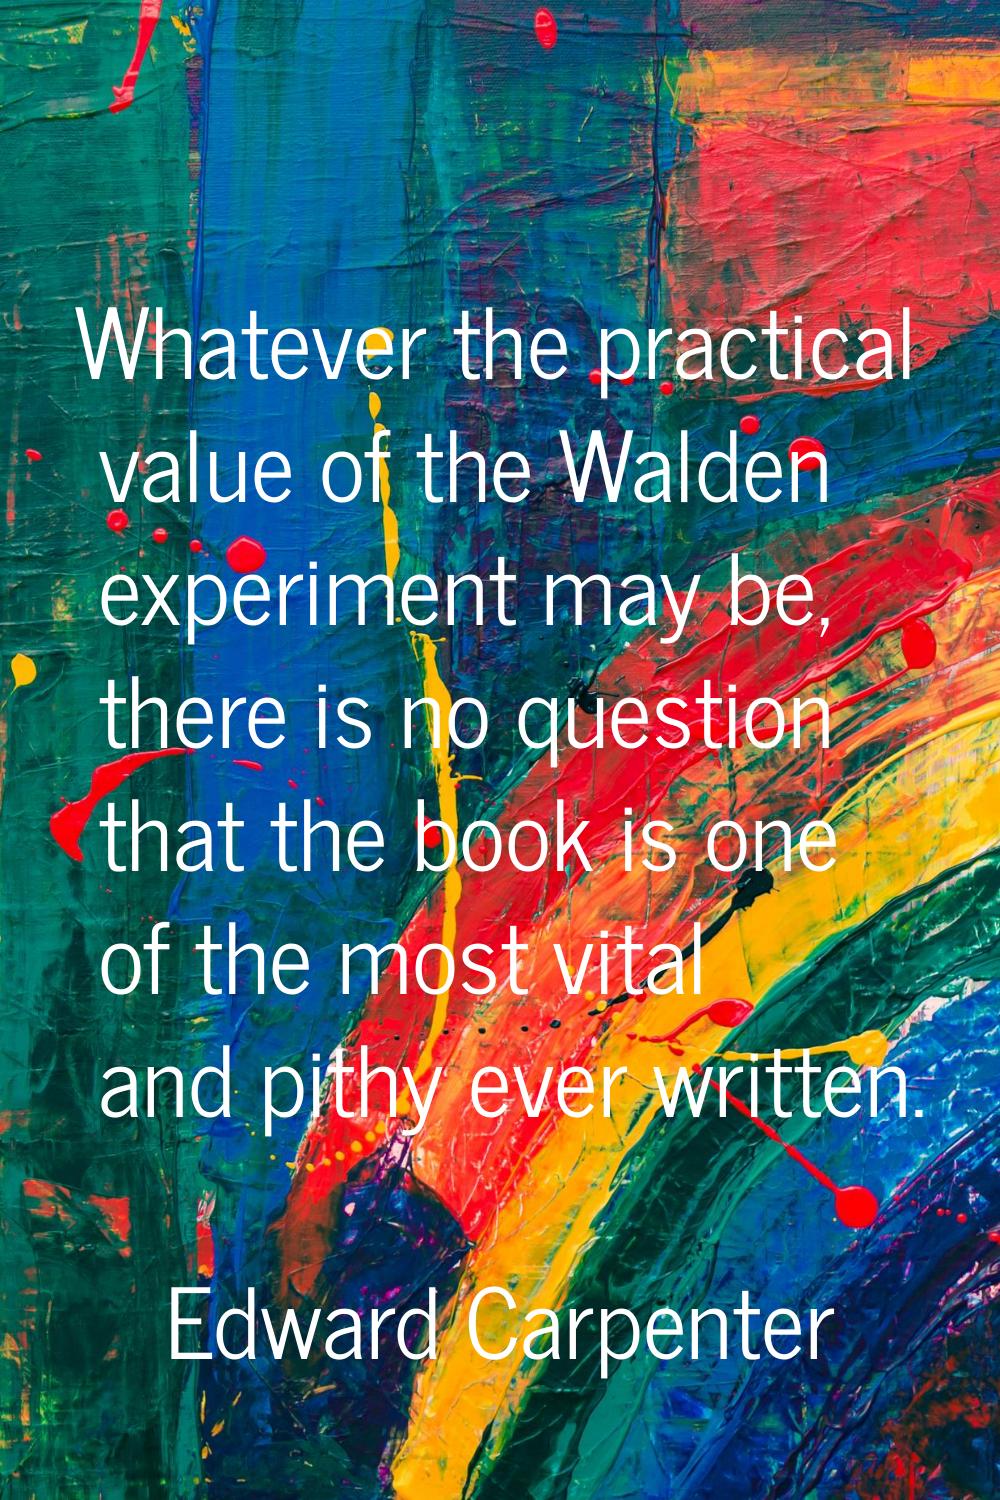 Whatever the practical value of the Walden experiment may be, there is no question that the book is